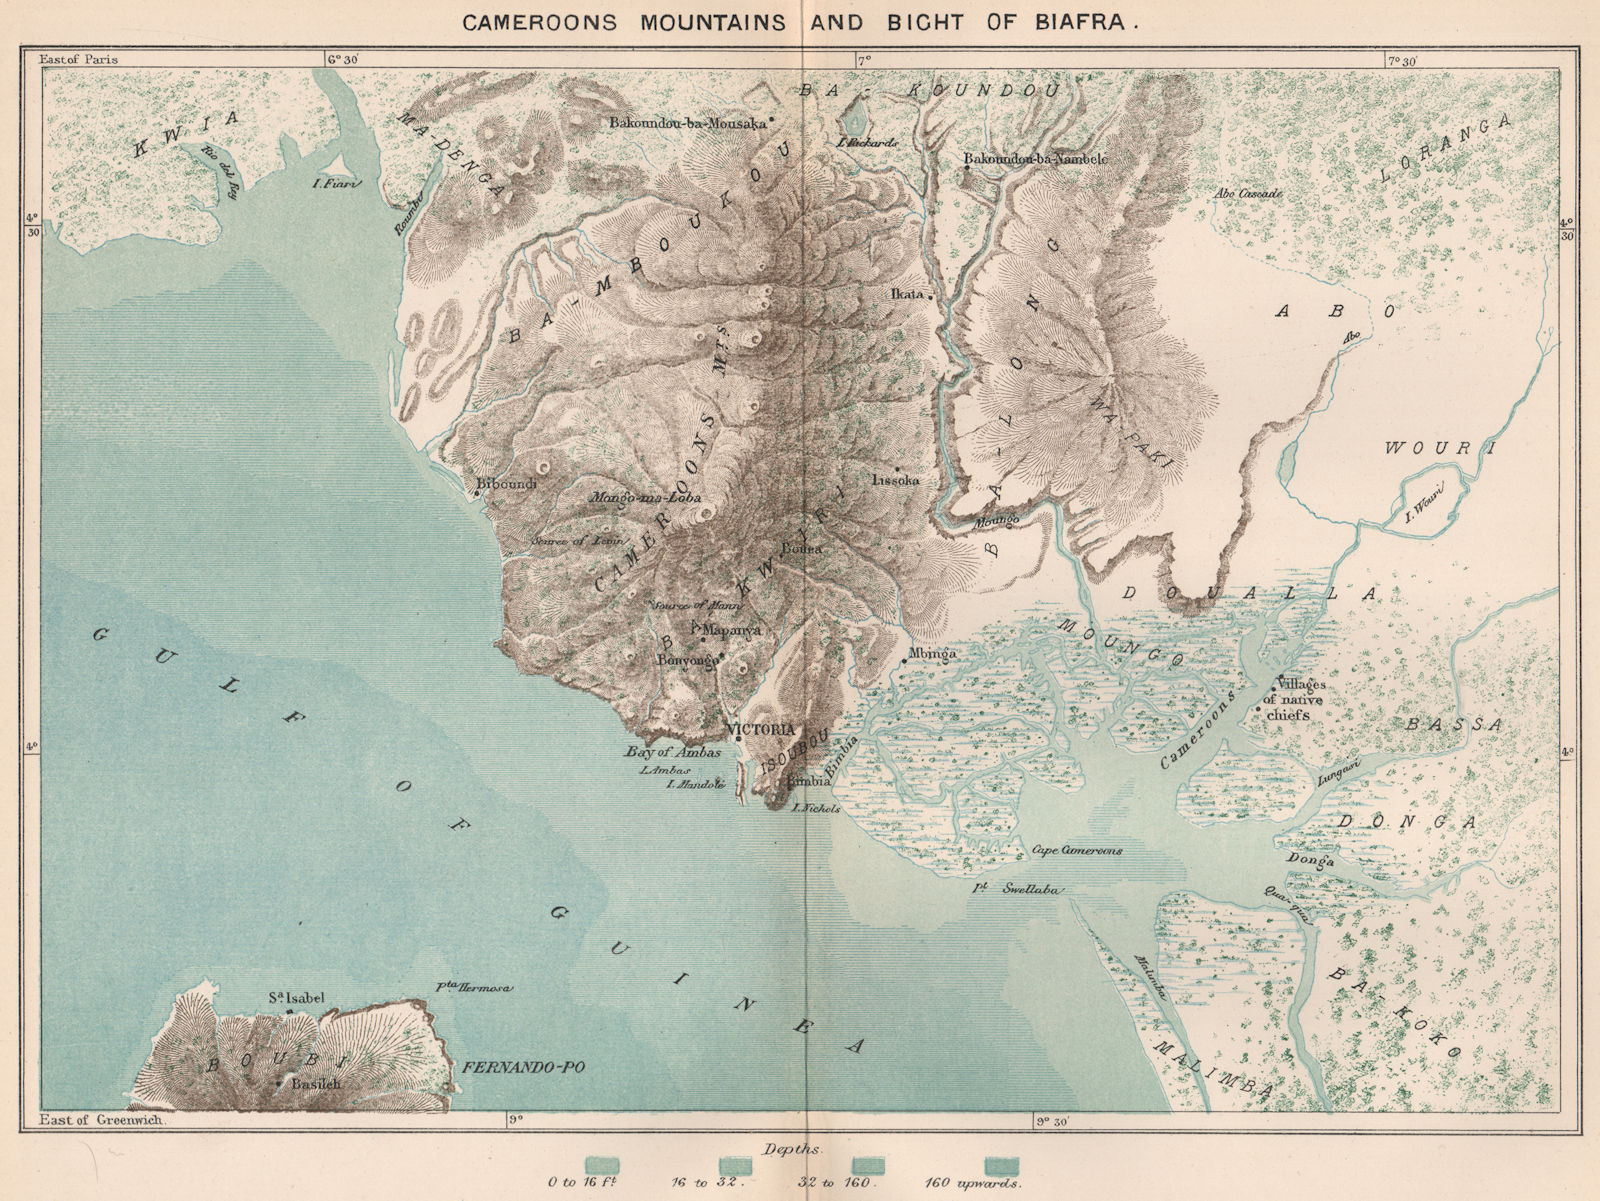 Associate Product Cameroon Mountains and Bight of Biafra/Bonny. Bioko. Douala 1885 old map